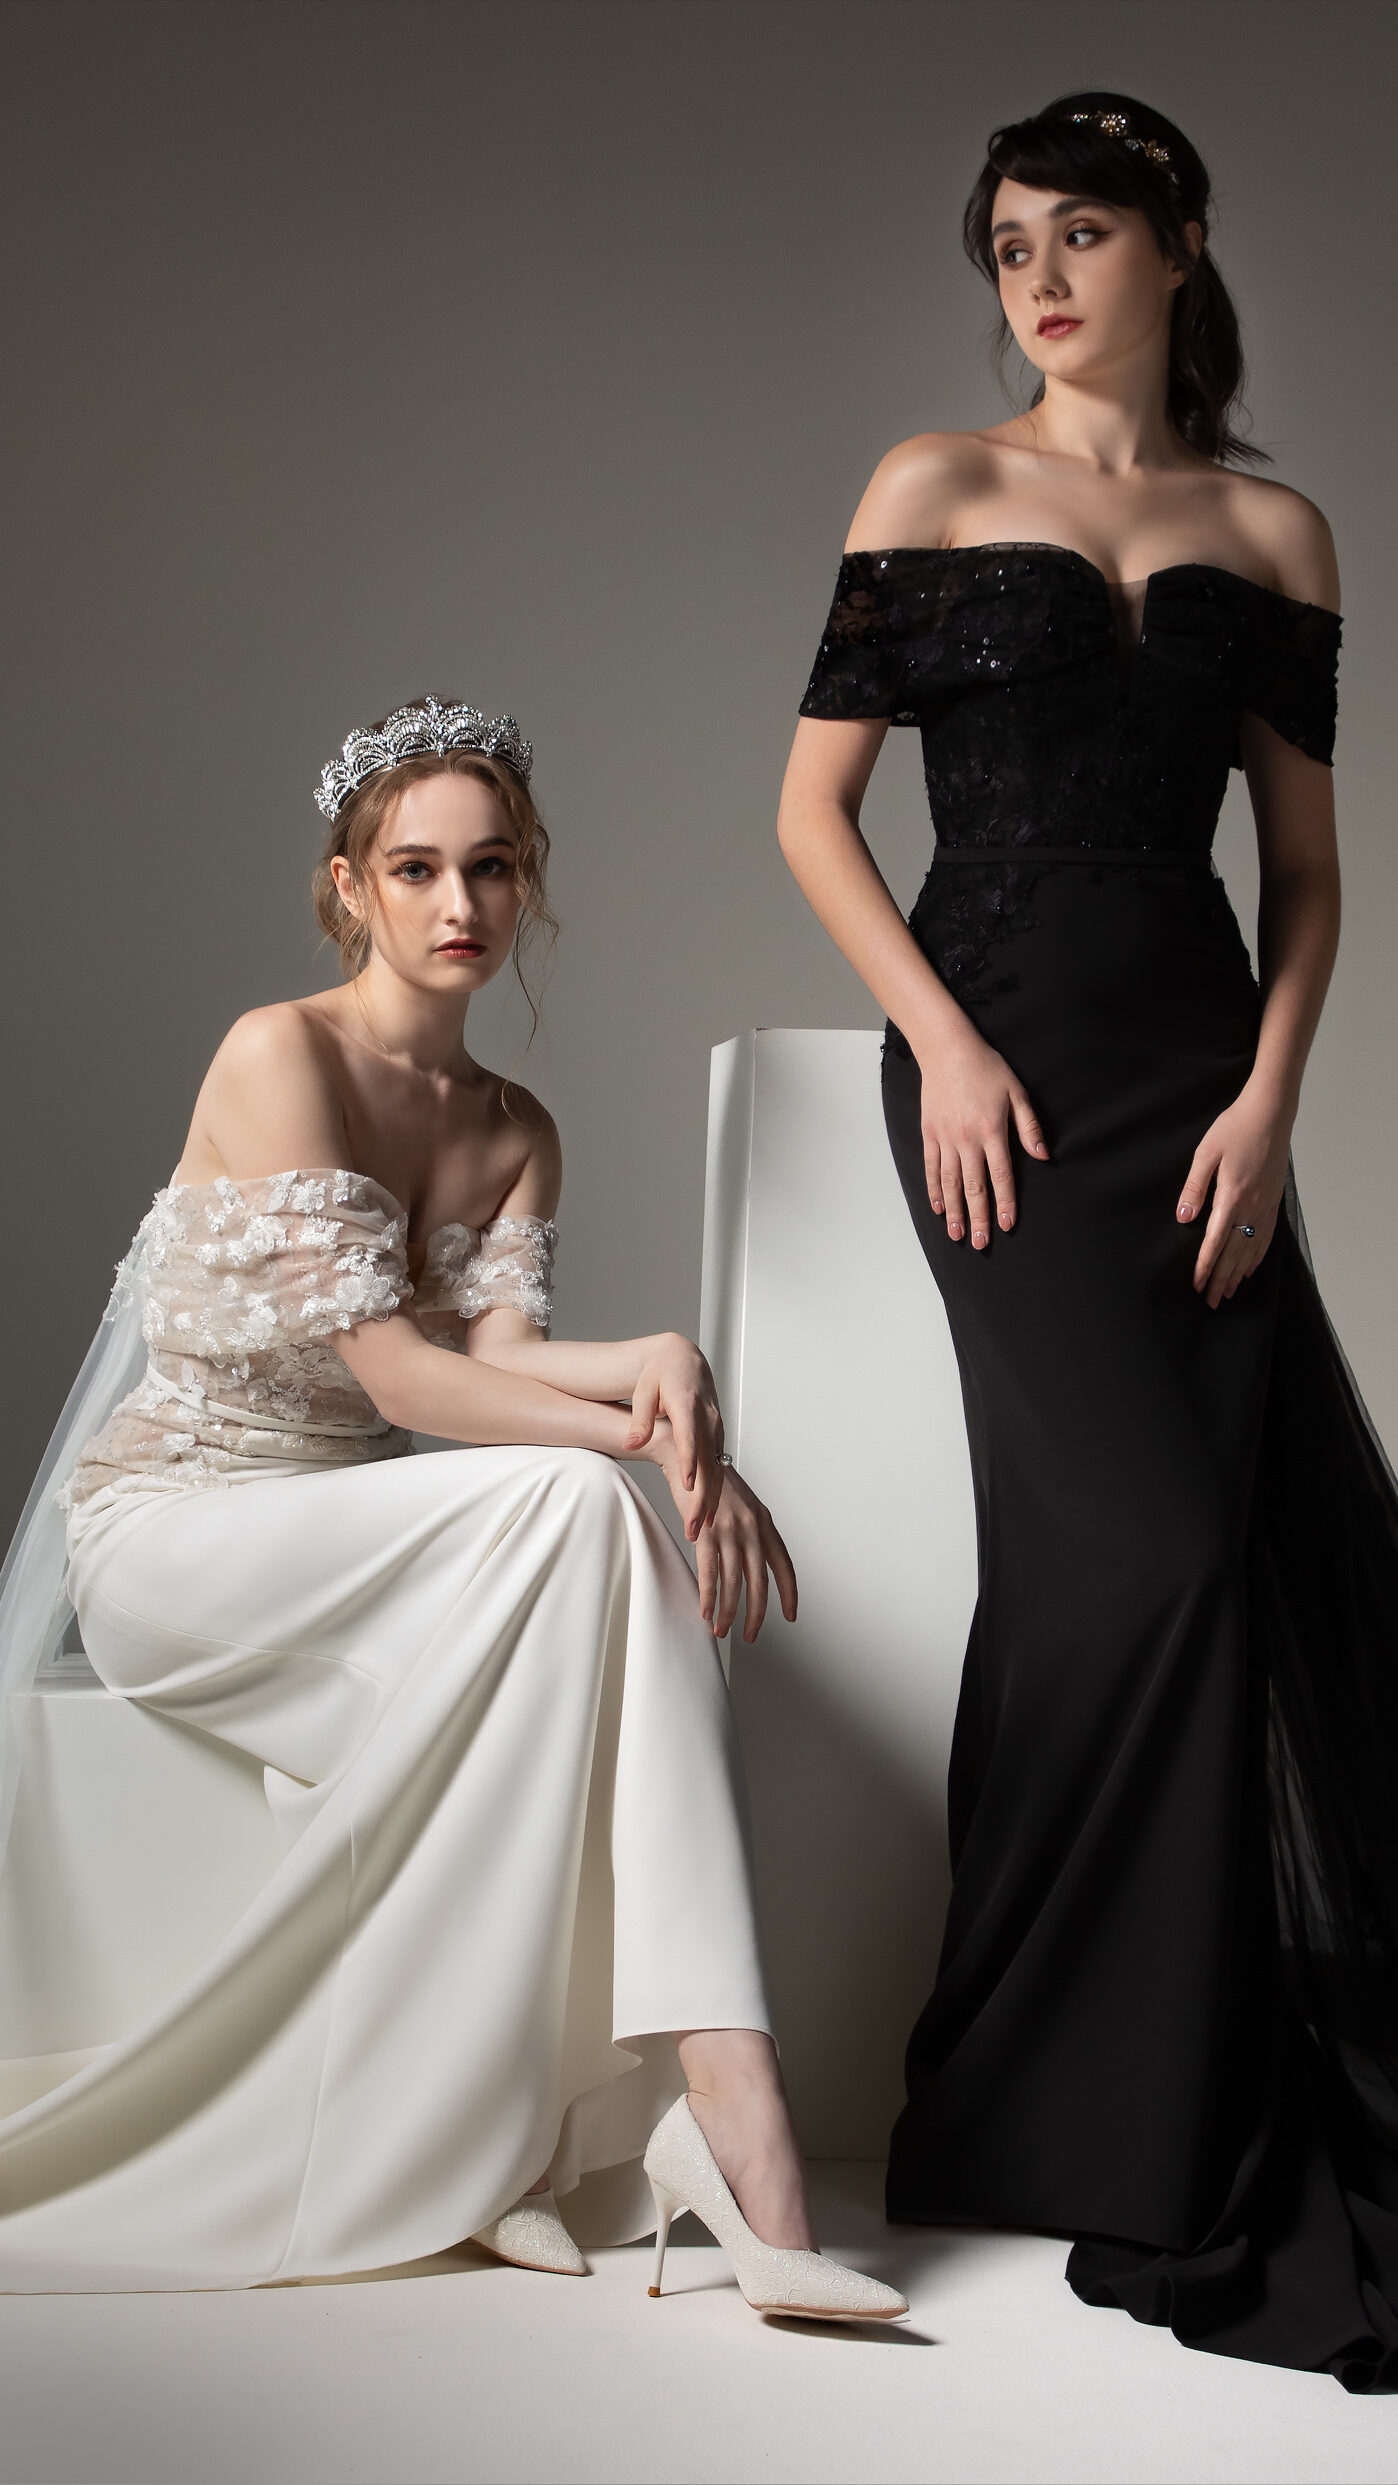 Classic Wedding Dresses by Cocomelody 2022 - CW2491 | MARIAH + CW2492 | CARTER